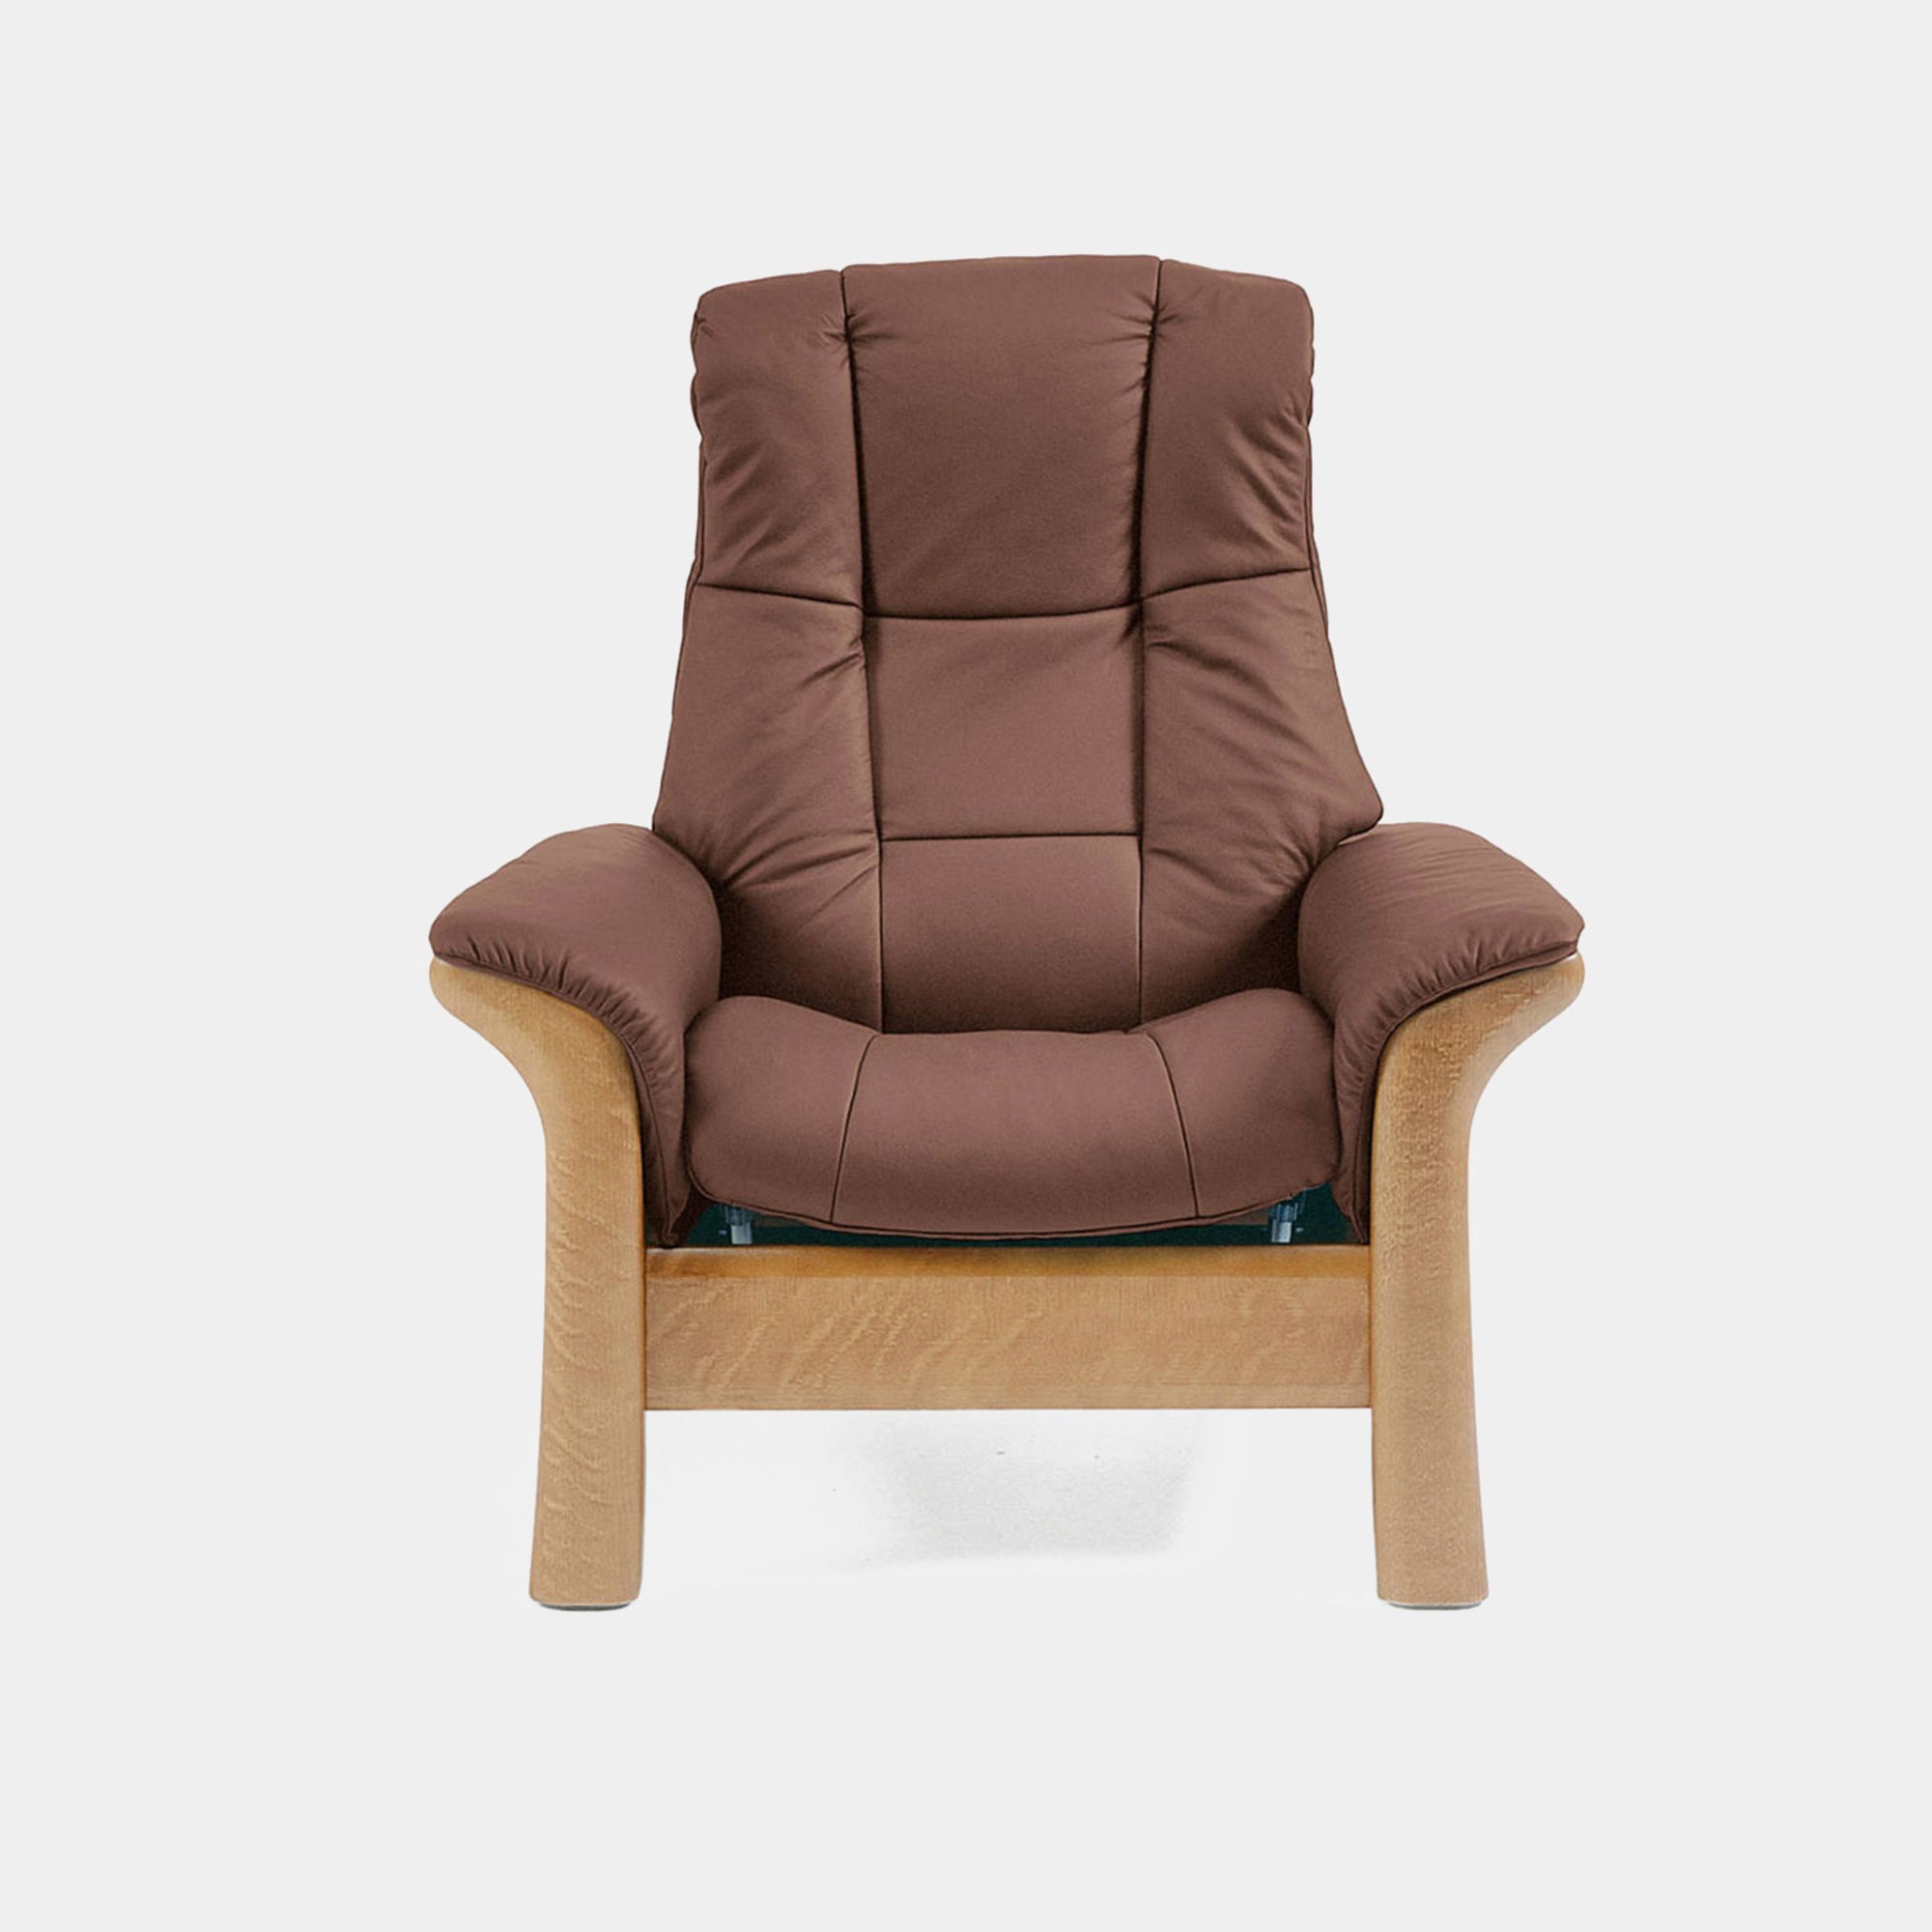 Stressless Windsor - Armchair High Back In Paloma Leather